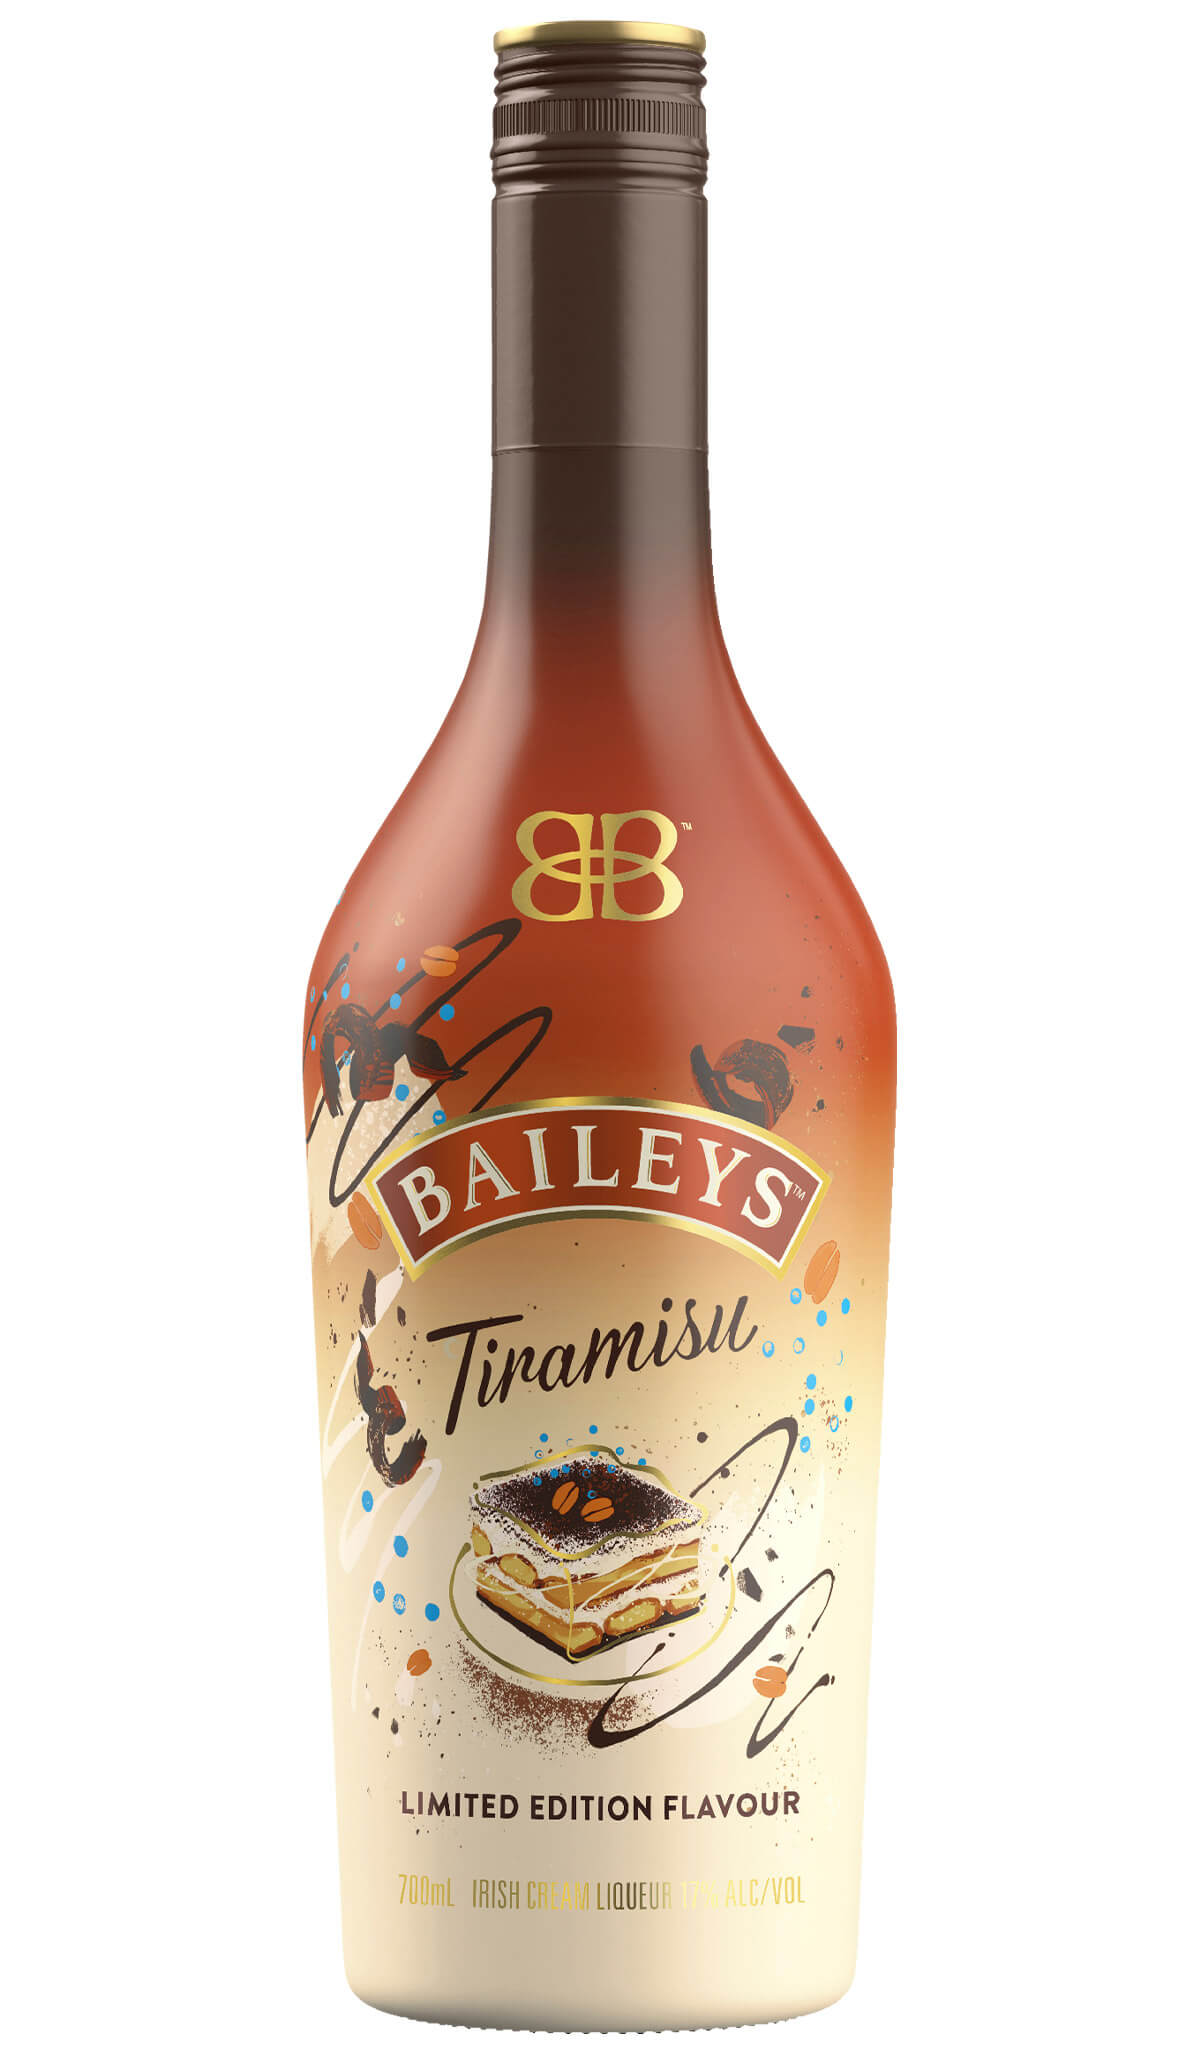 Find out more, explore the range and purchase the limited edition Baileys Tiramisu Cocktail Liqueur 700mL available online at Wine Sellers Direct - Australia's independent liquor specialists.